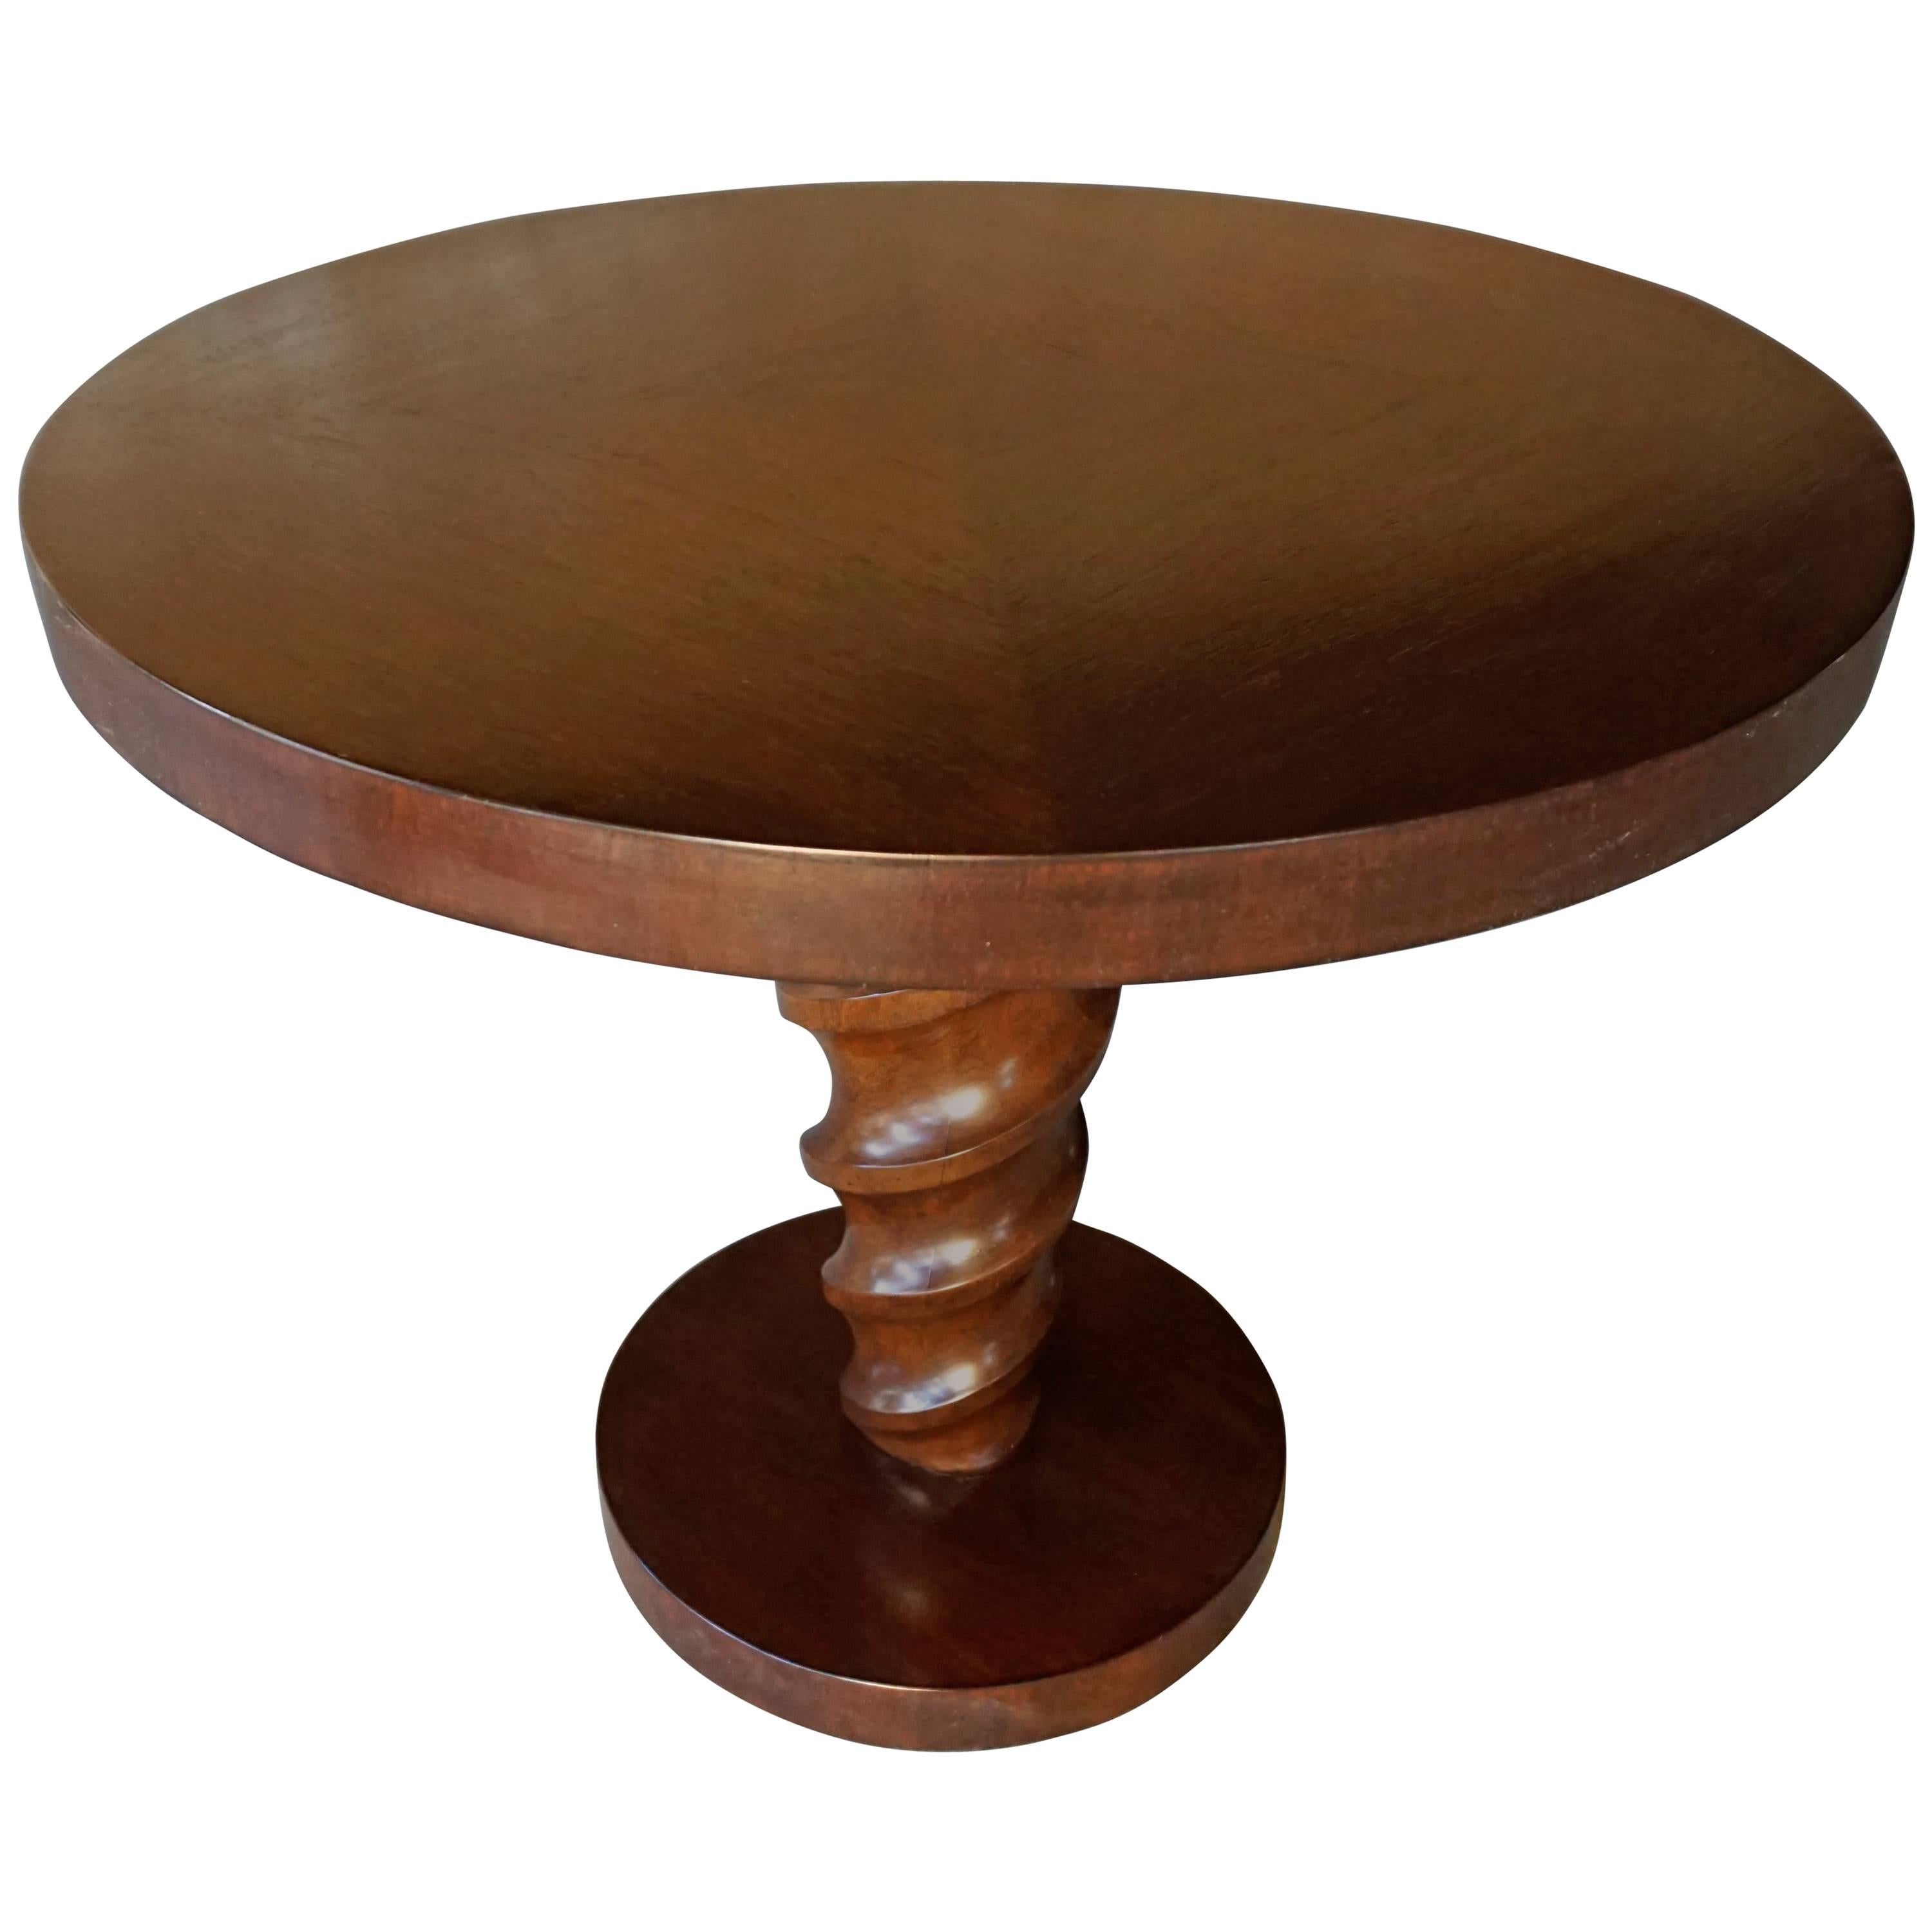 Rare "Corkscrew" Circular Side Table by Johan Tapp  C. 1940s For Sale